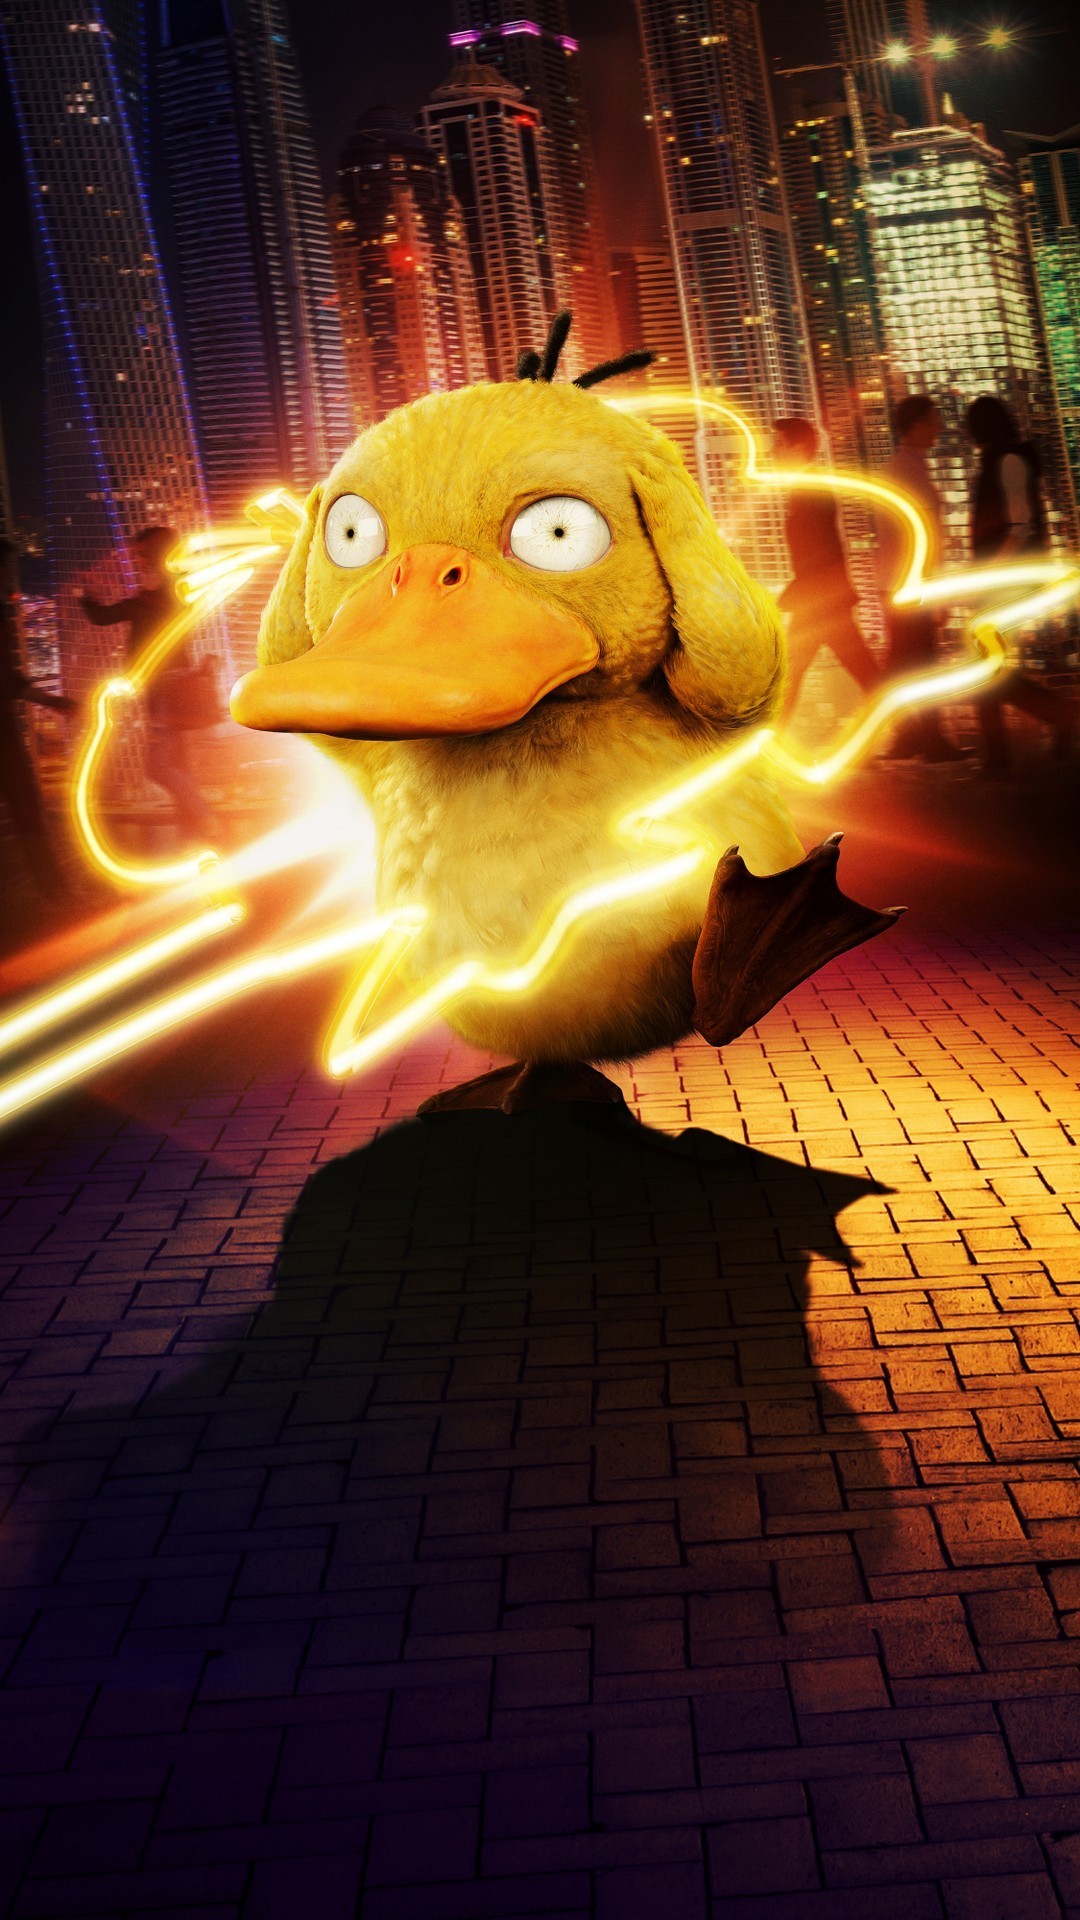 Pokémon Detective Pikachu Phone Wallpaper with high-resolution 1080x1920 pixel. You can use this wallpaper for your Windows and Mac OS computers as well as your Android and iPhone smartphones